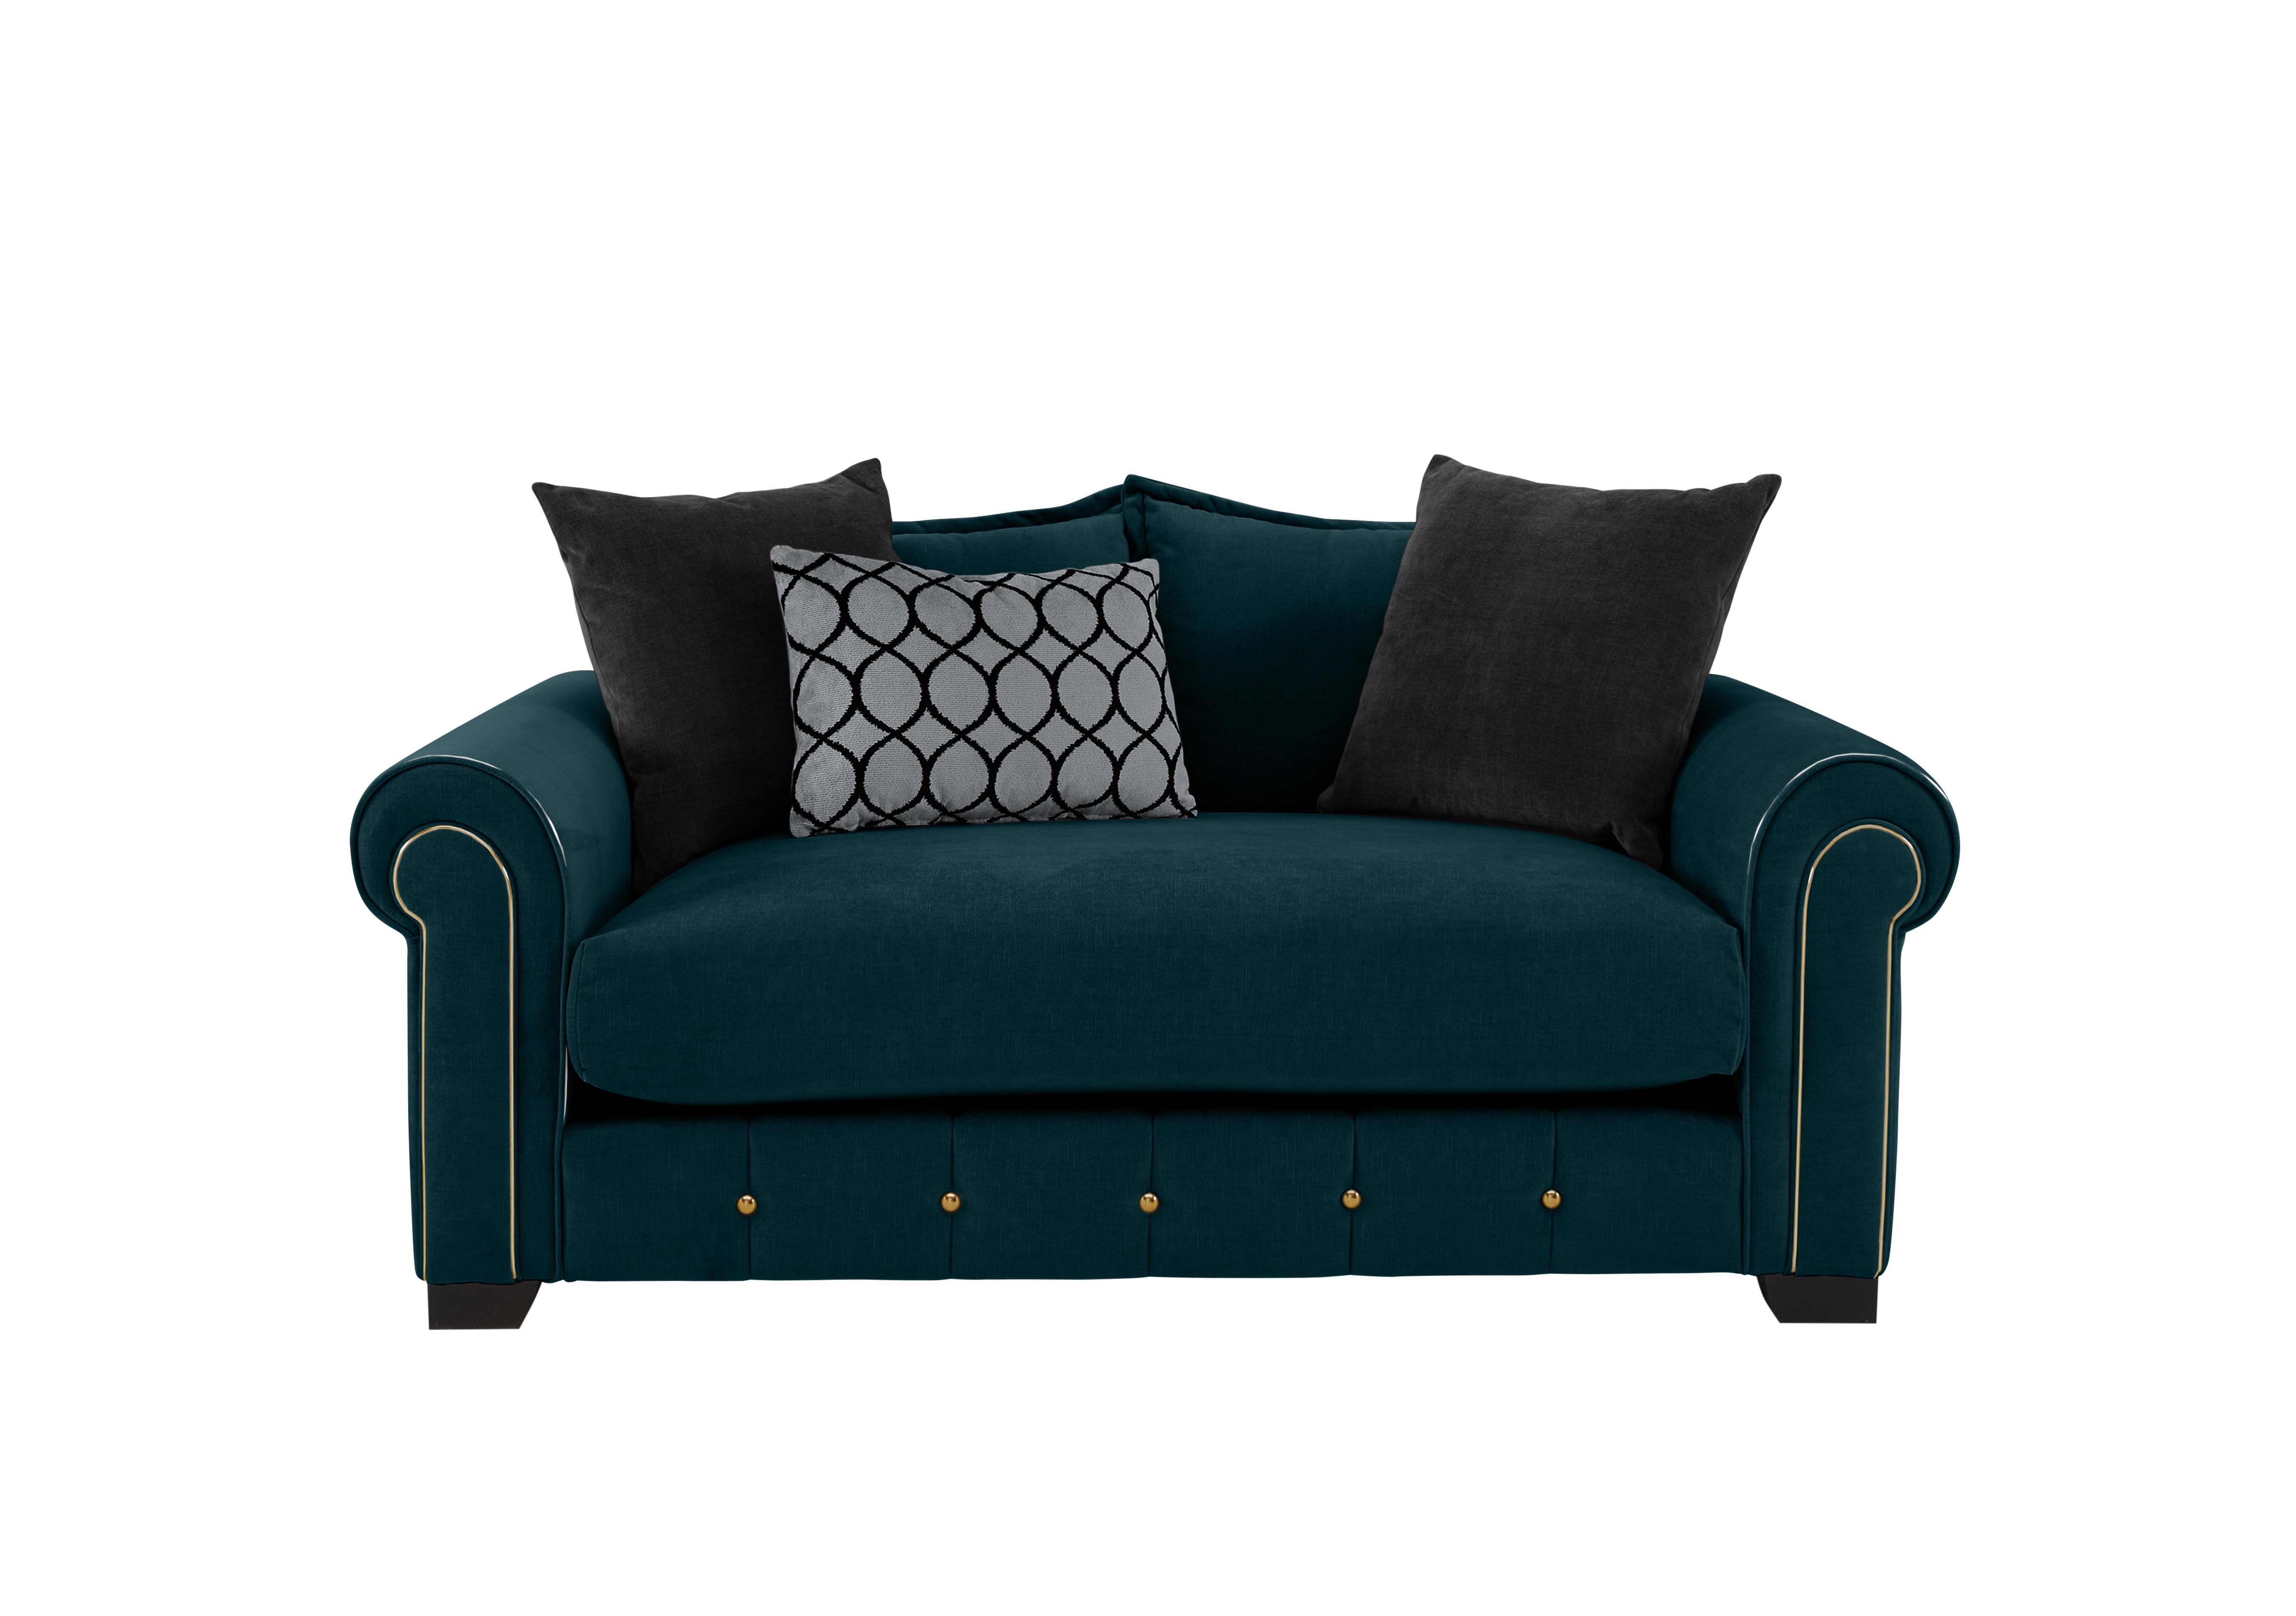 Sumptuous 2 Seater Fabric Sofa in Chamonix Teal Dk/Gold on Furniture Village